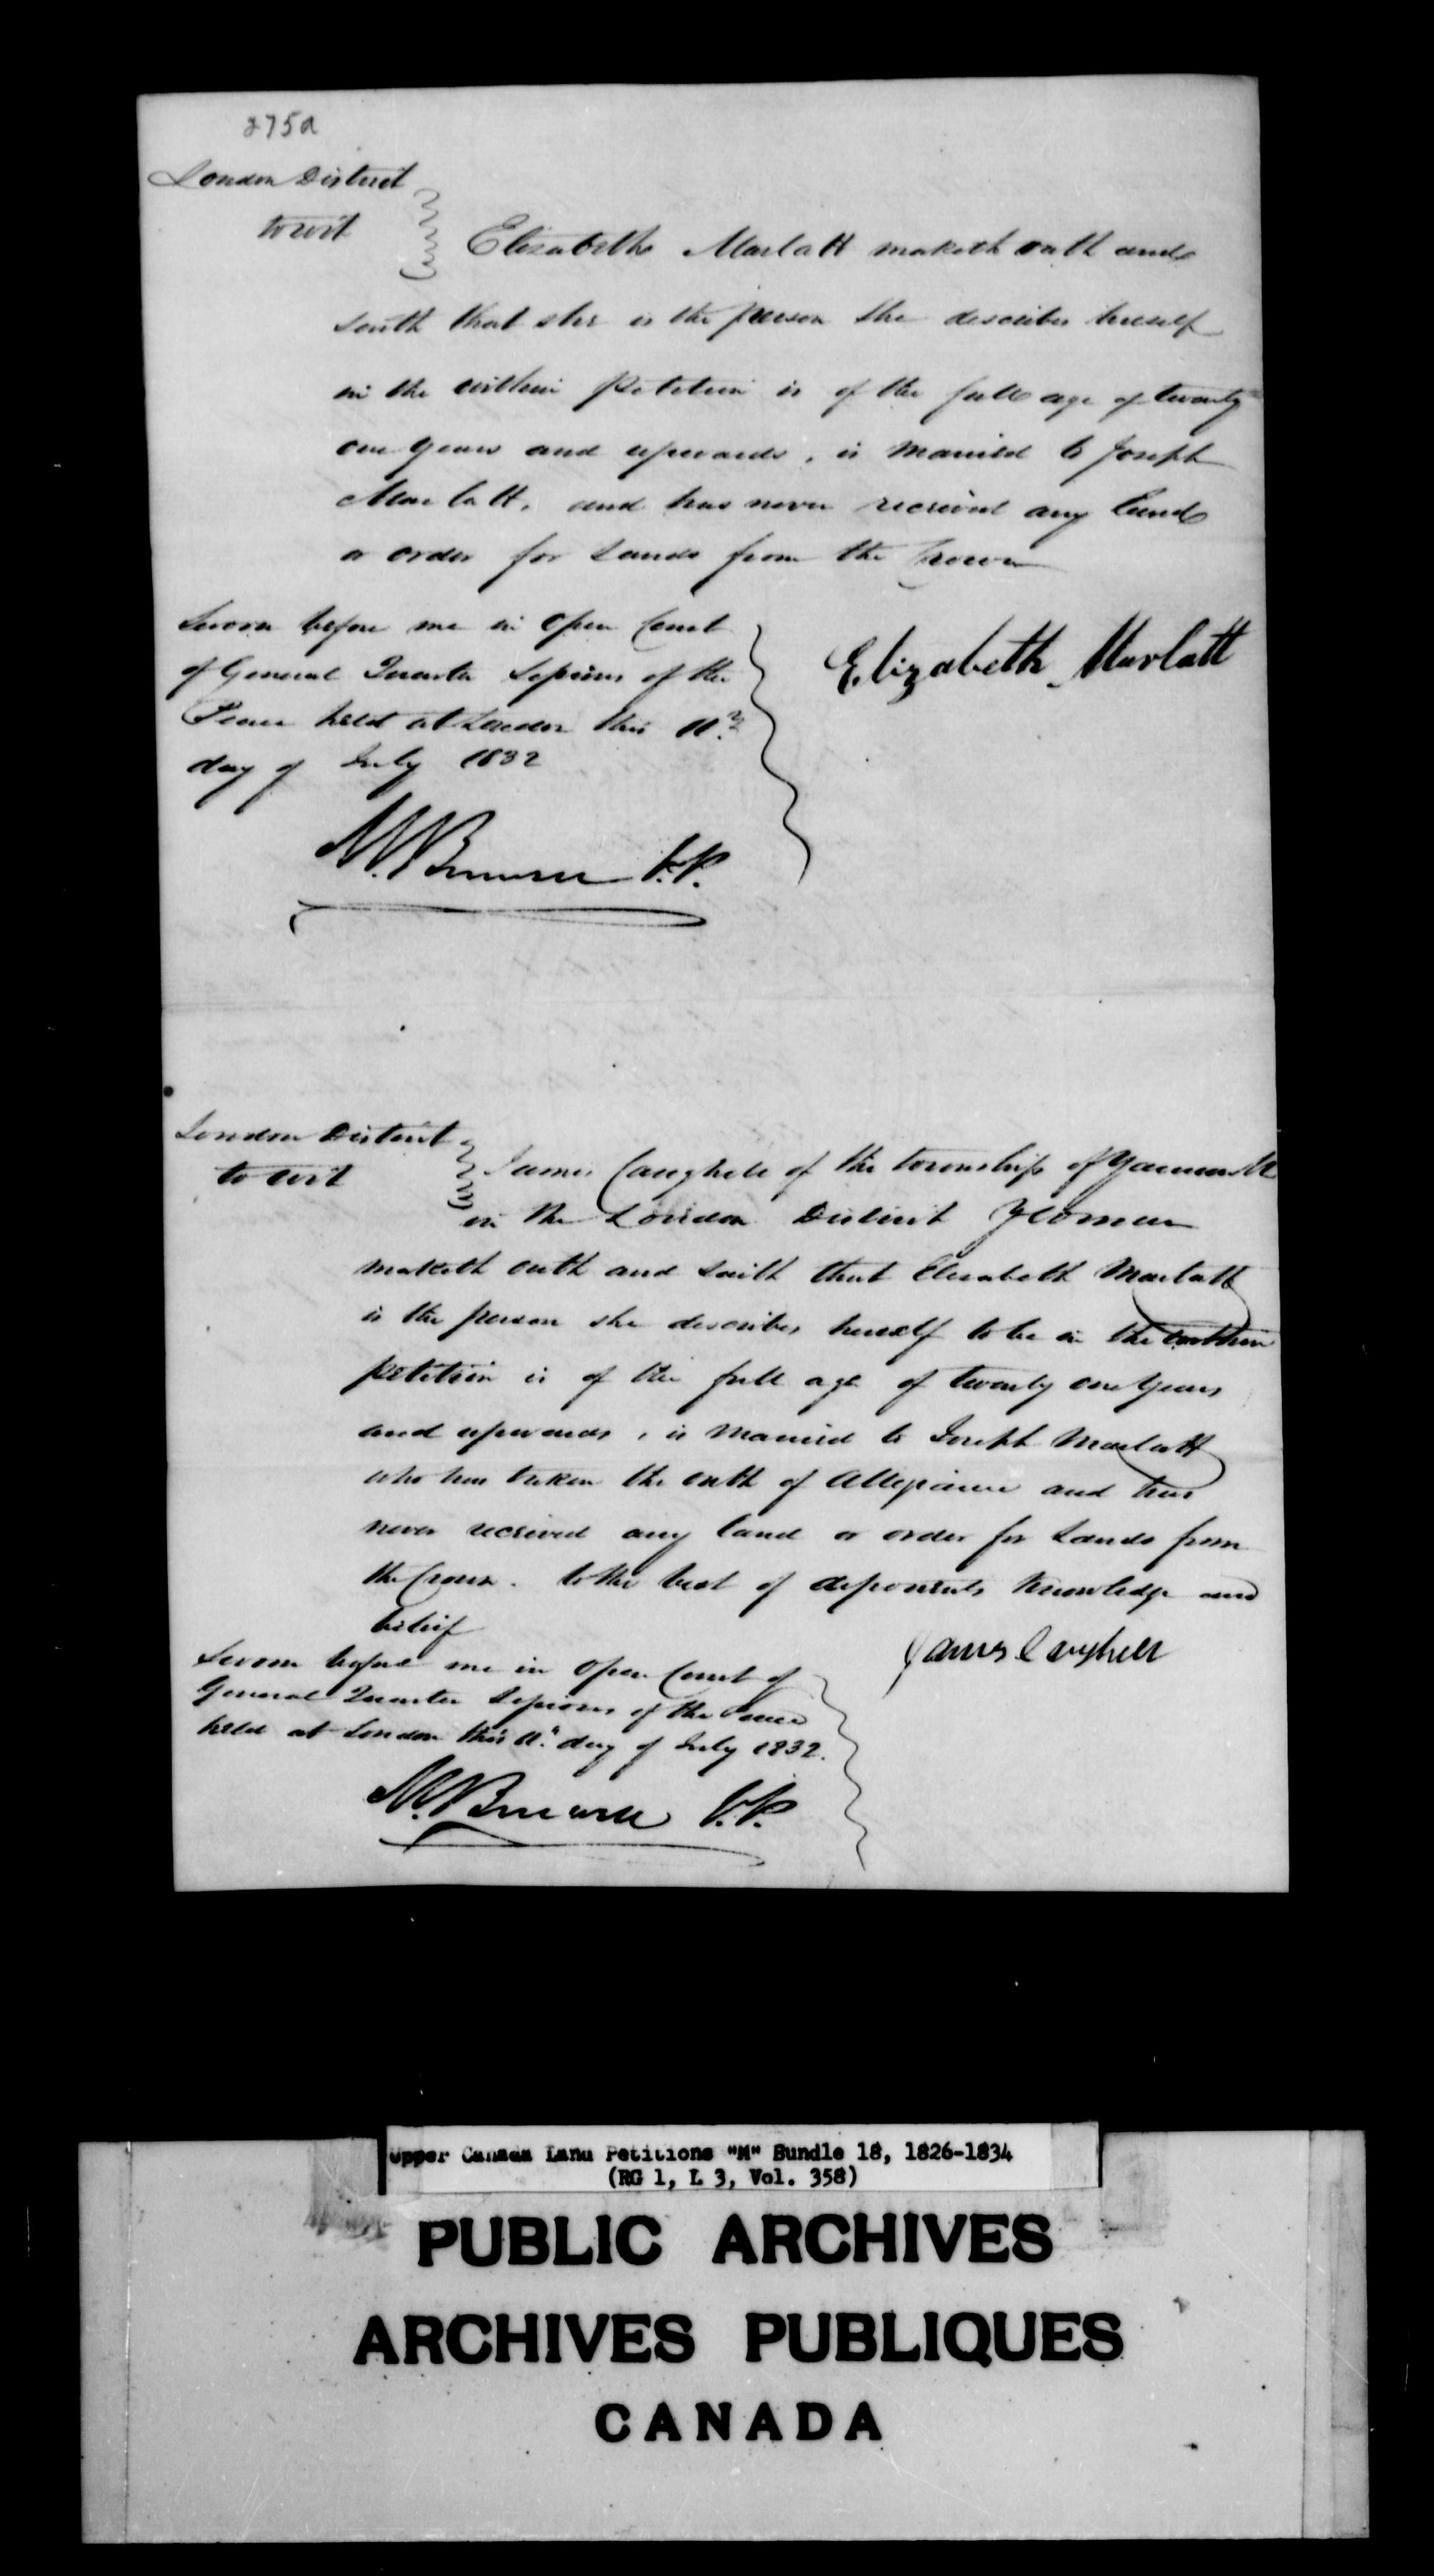 Title: Upper Canada Land Petitions (1763-1865) - Mikan Number: 205131 - Microform: c-2214